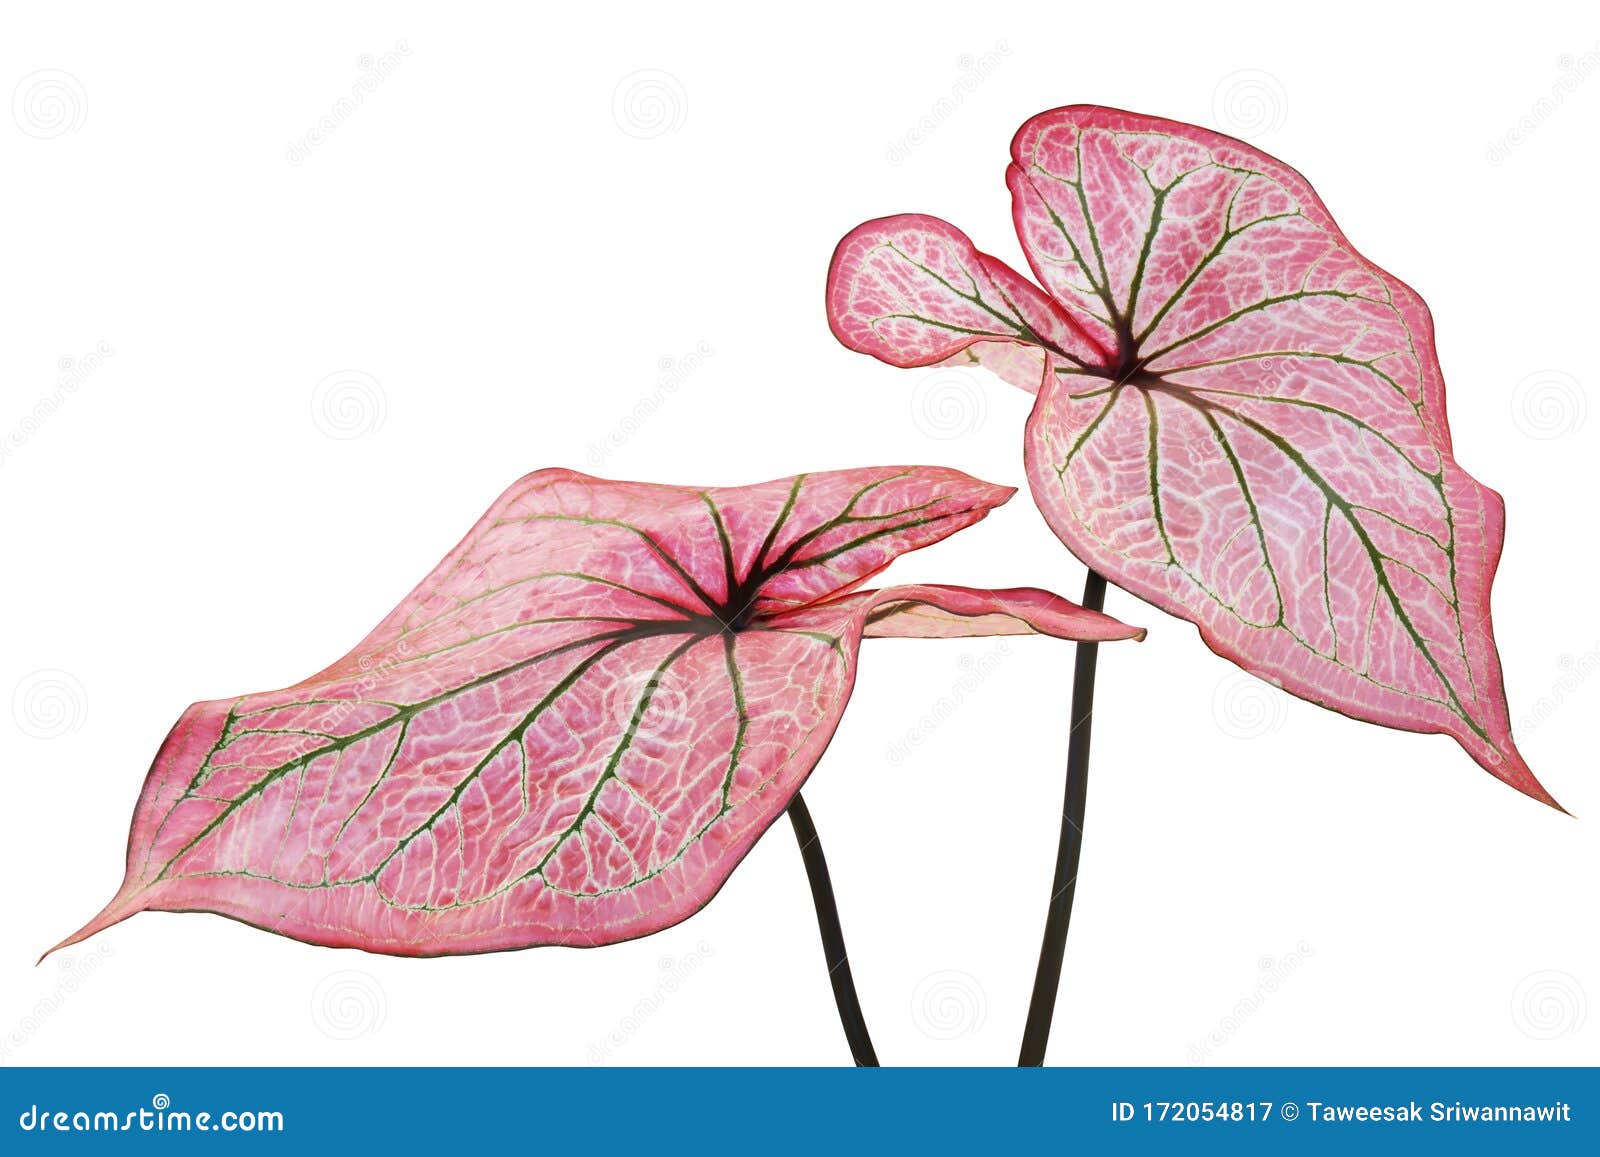 Pink Leaves Green Veins of Caladium Plant Isolated on White Background ...